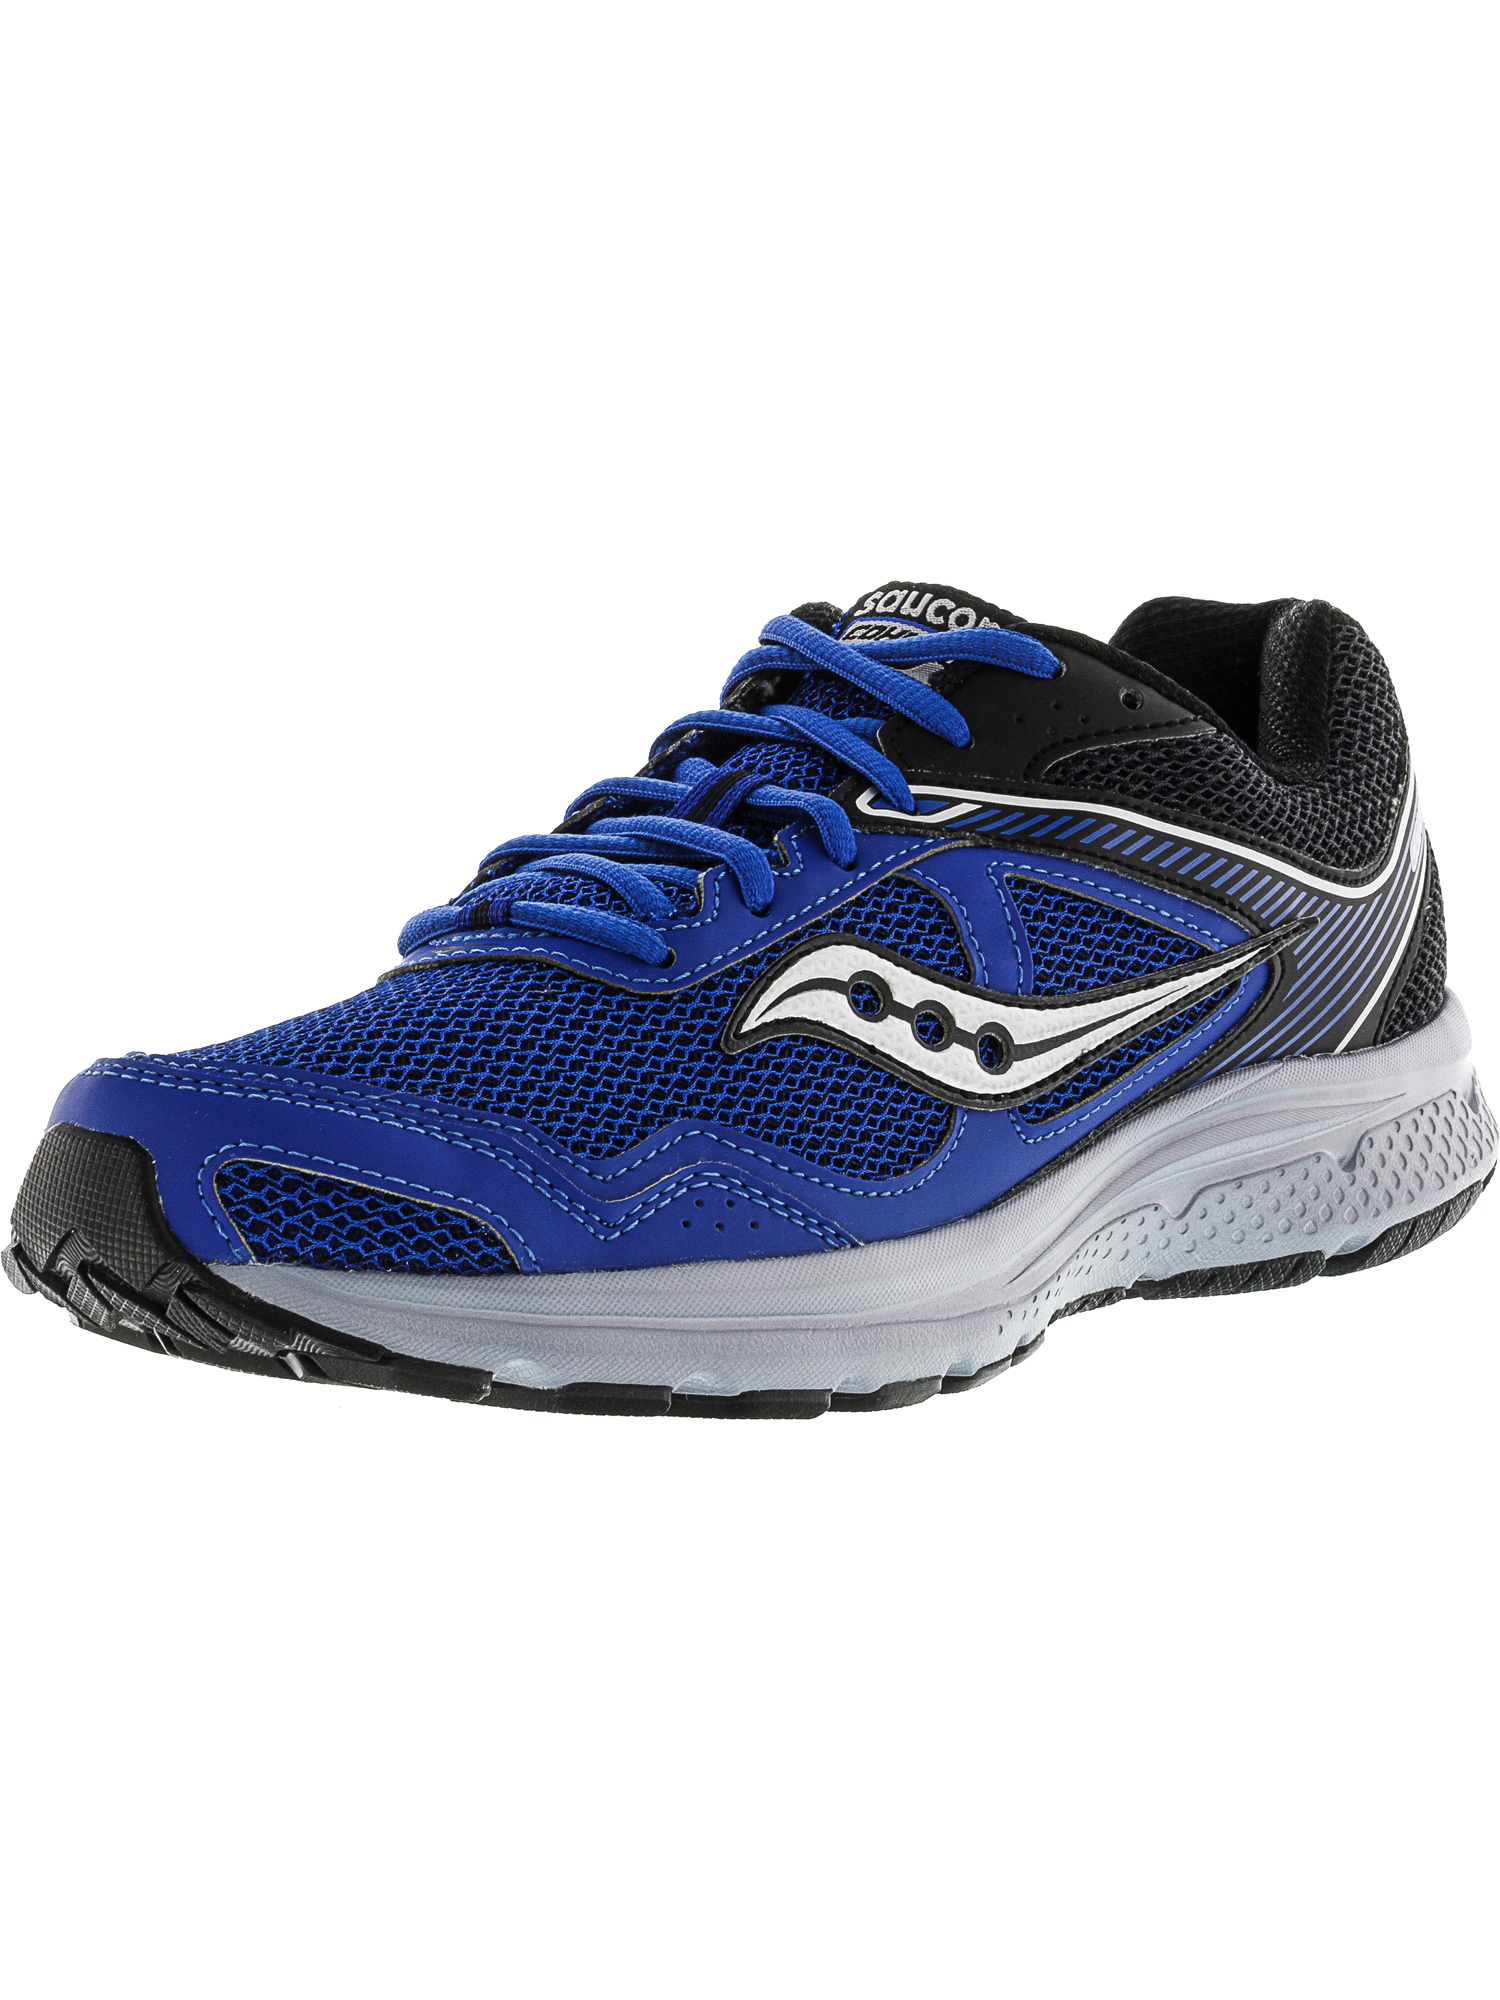 saucony men's cohesion 10 running shoes